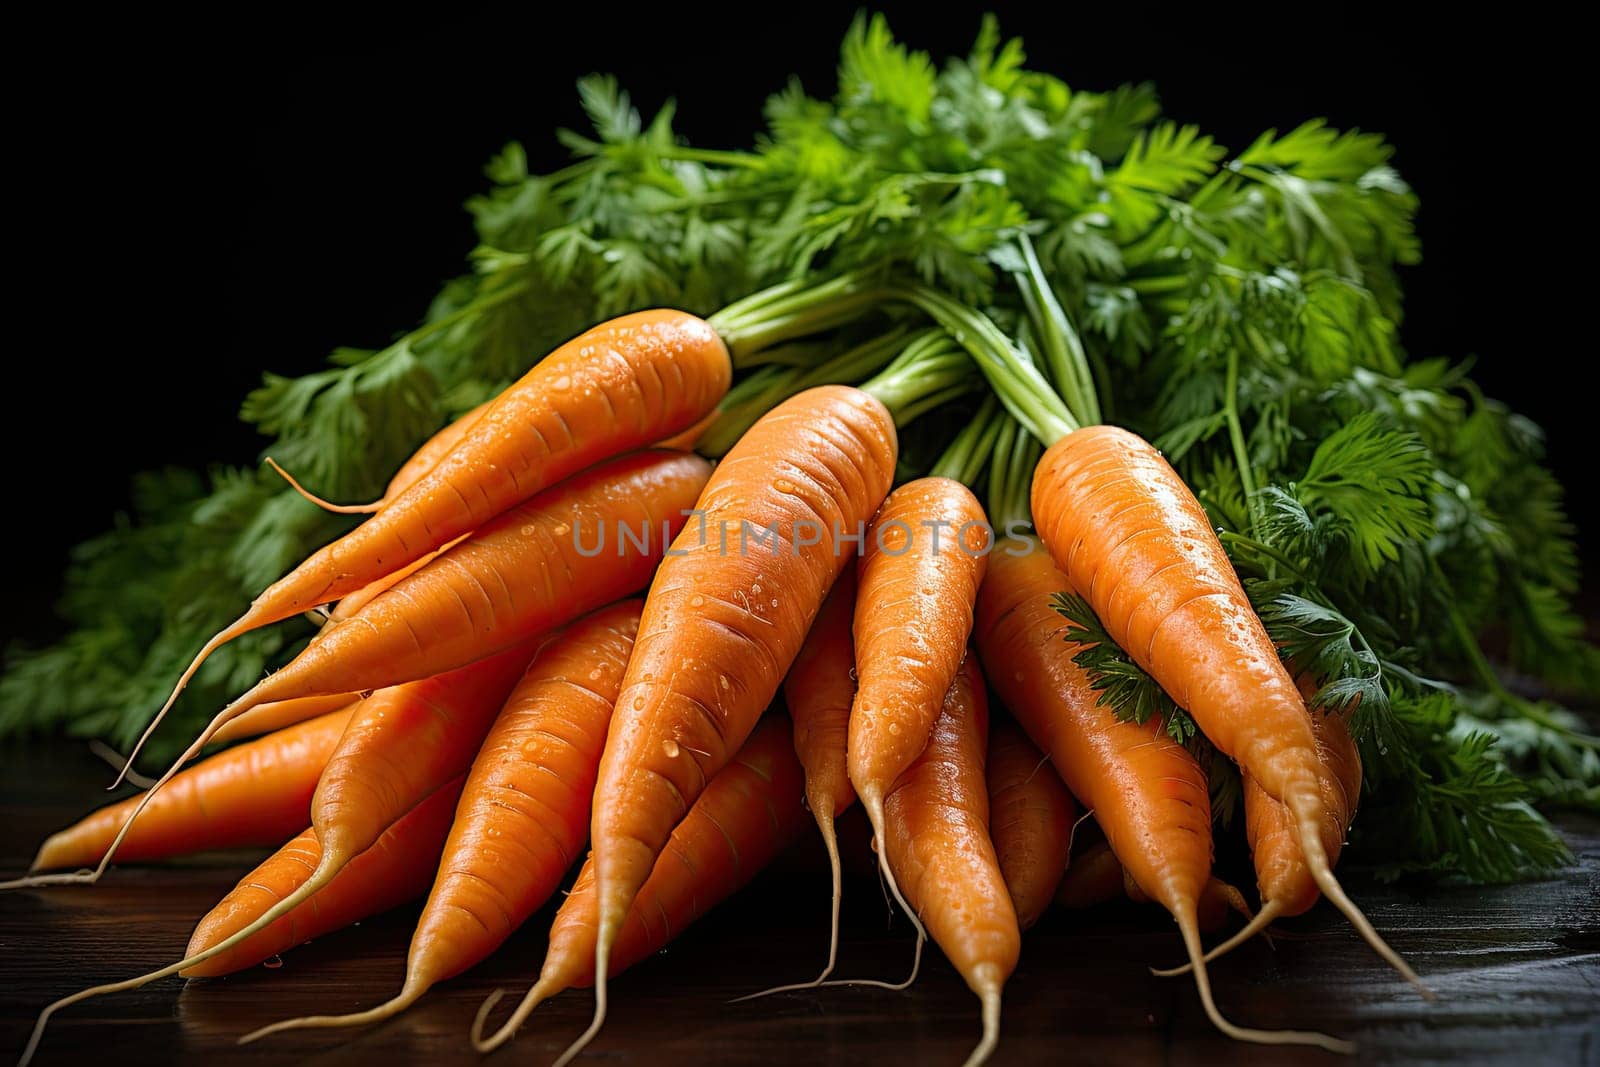 Bunch of carrots on black background, ripe vegetables, a healthy eating concept by AnatoliiFoto